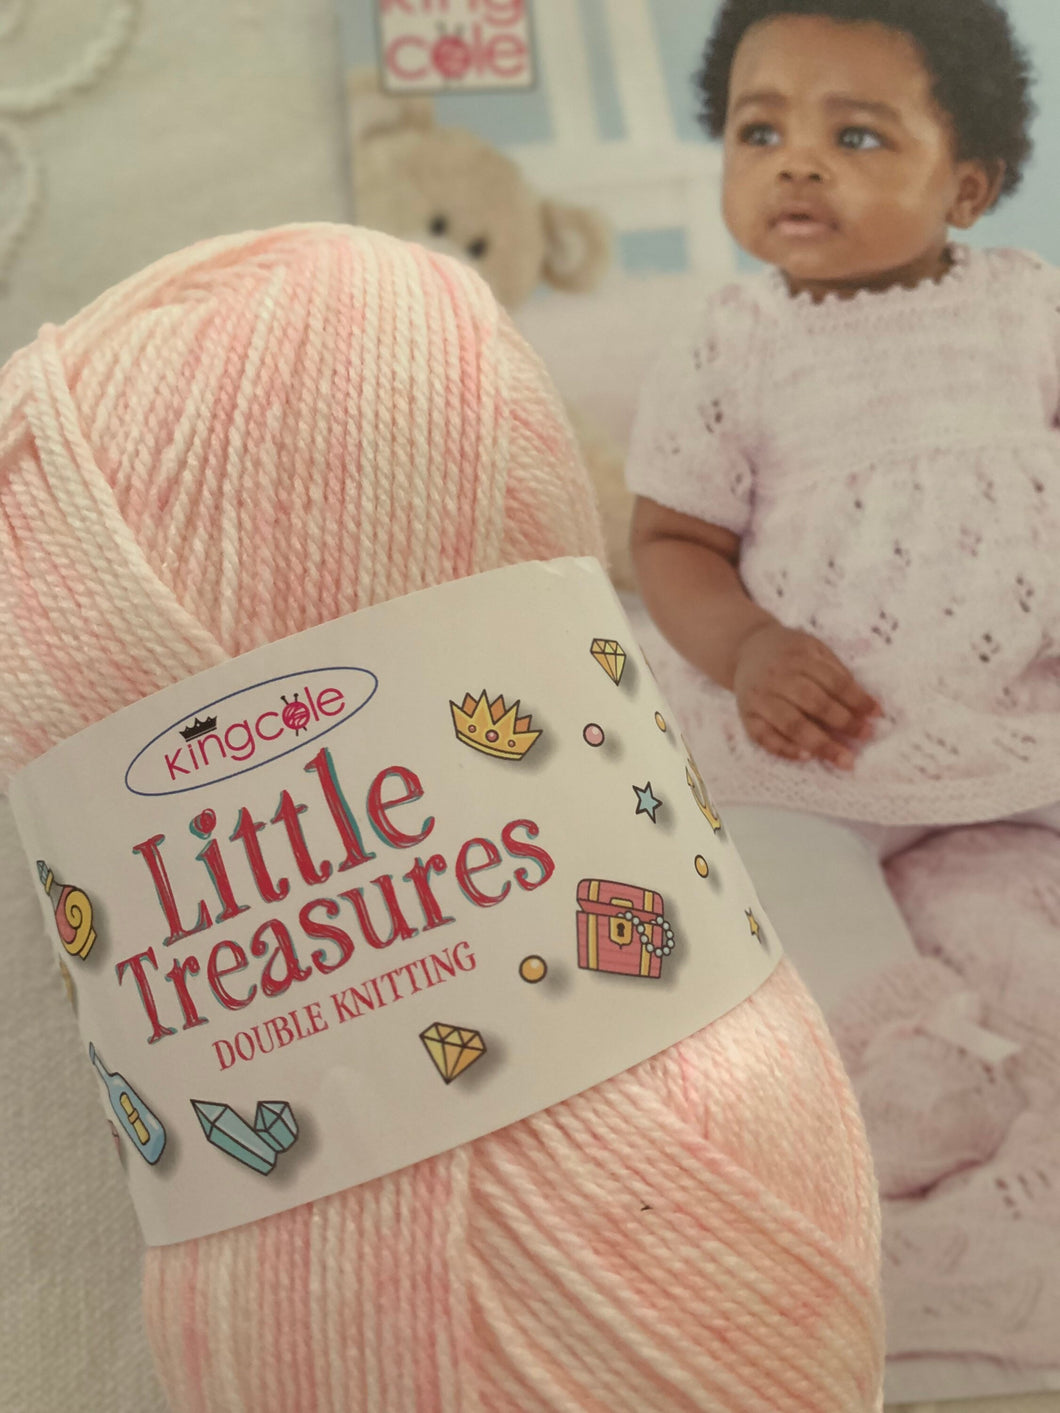 King cole little treasures yarn dk wool with knitting pattern 5856 baby girl dress cardigan and blanket prem- 12 months